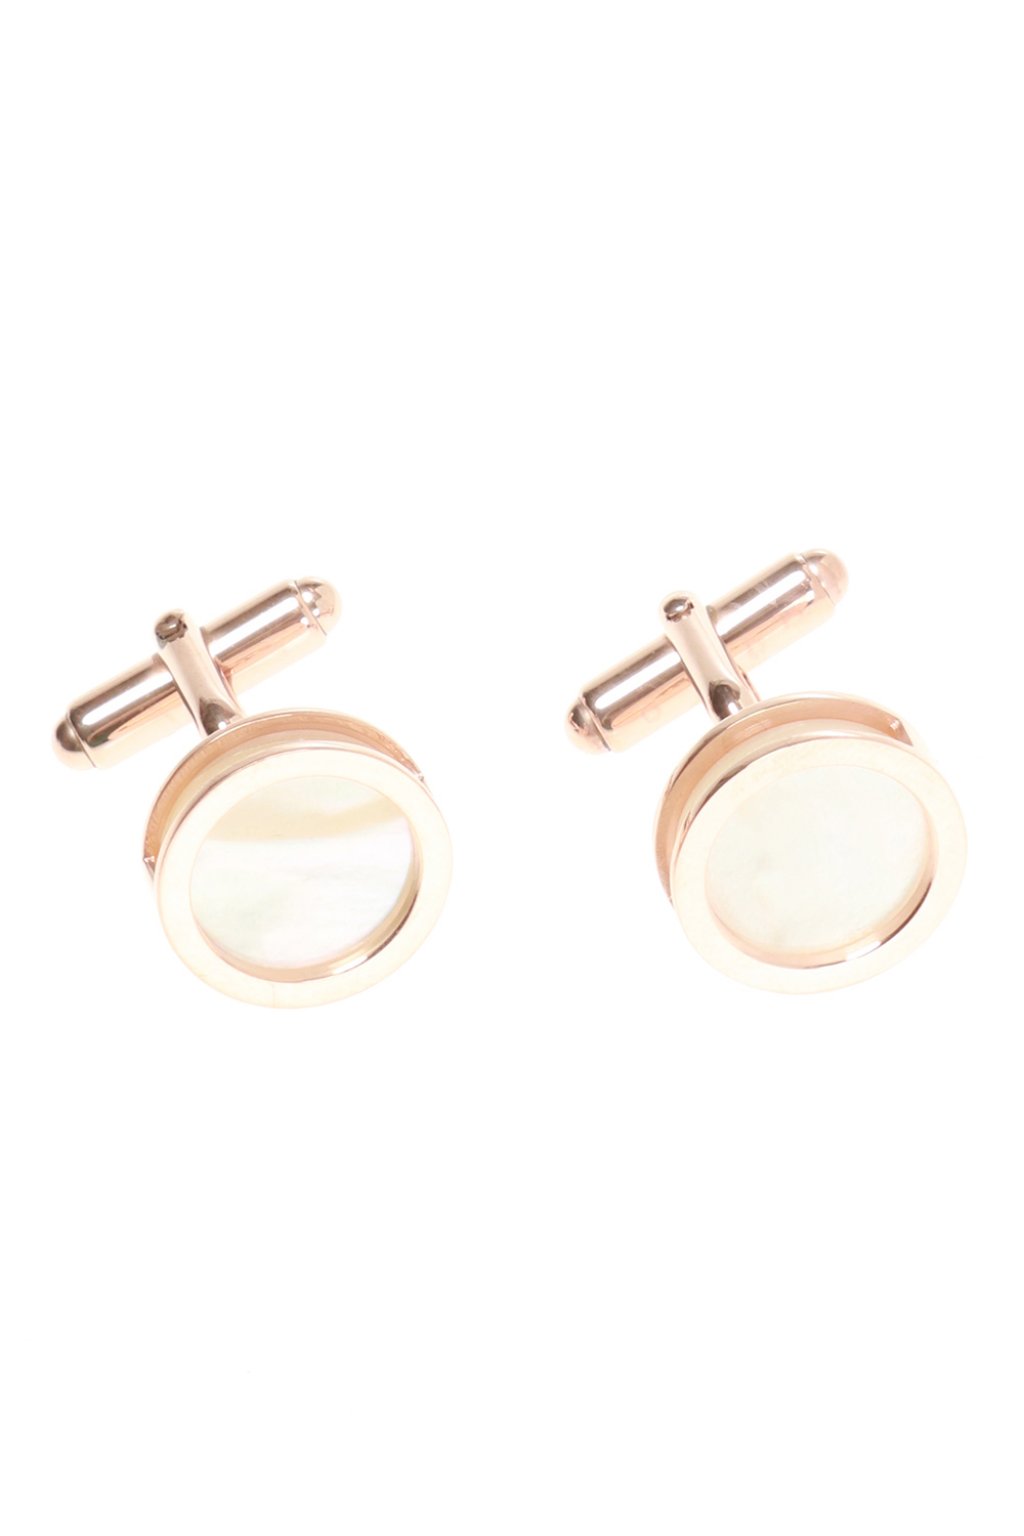 Lanvin Cufflinks with removable ornaments